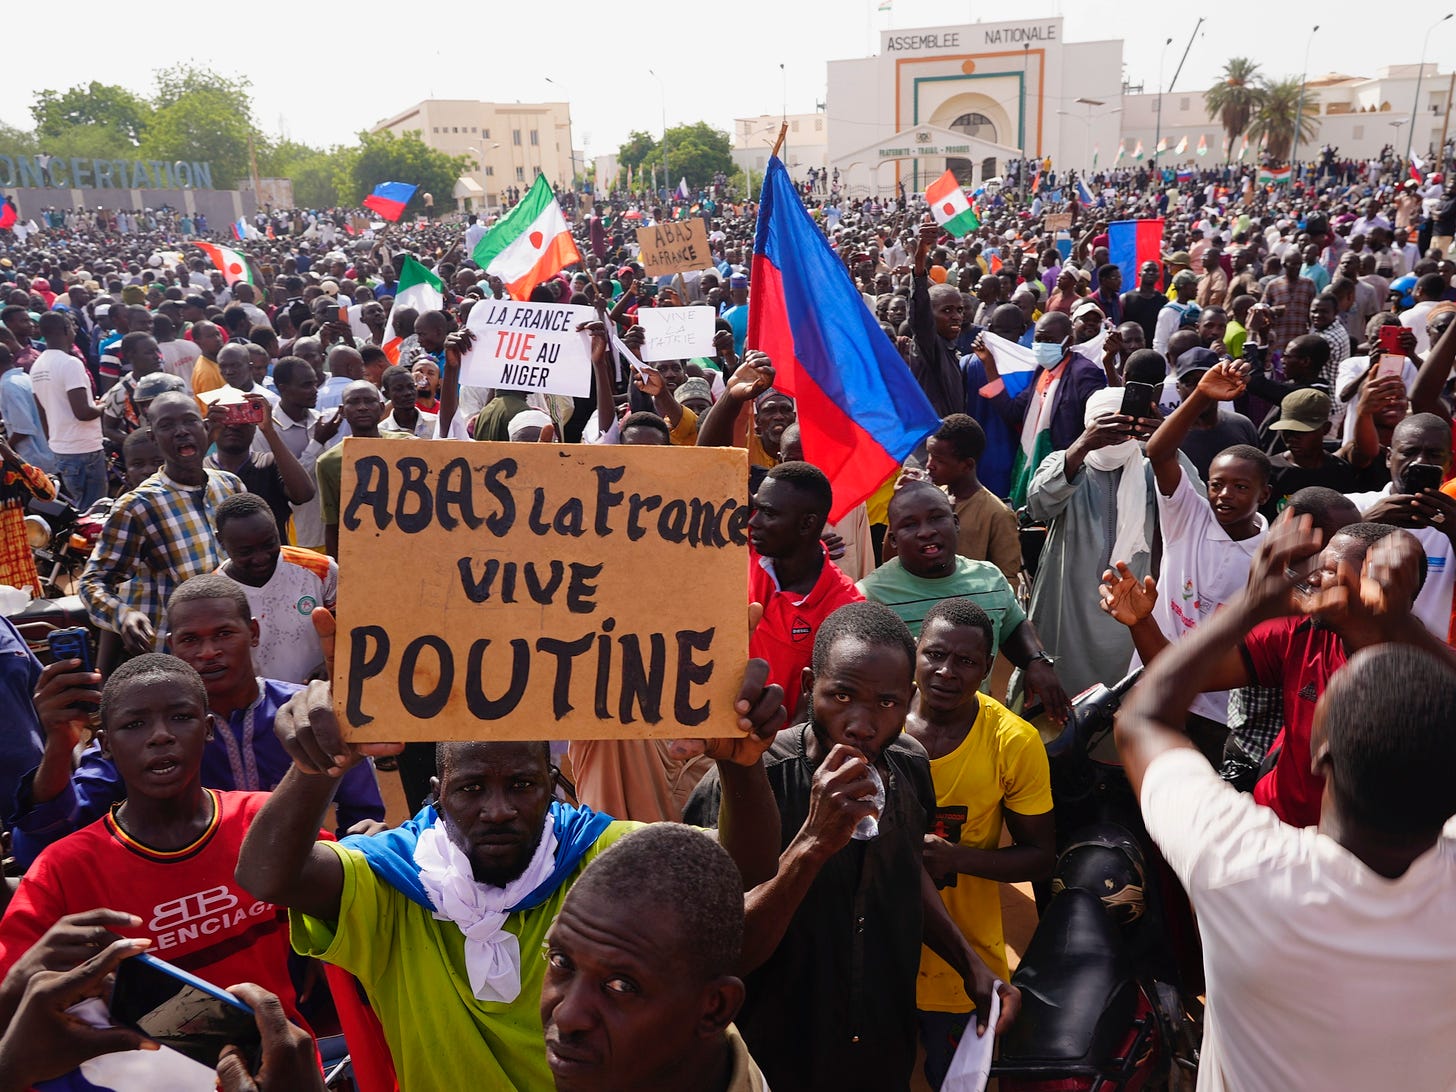 Supporters of Niger's coup march waving Russian flags and denouncing France  : NPR